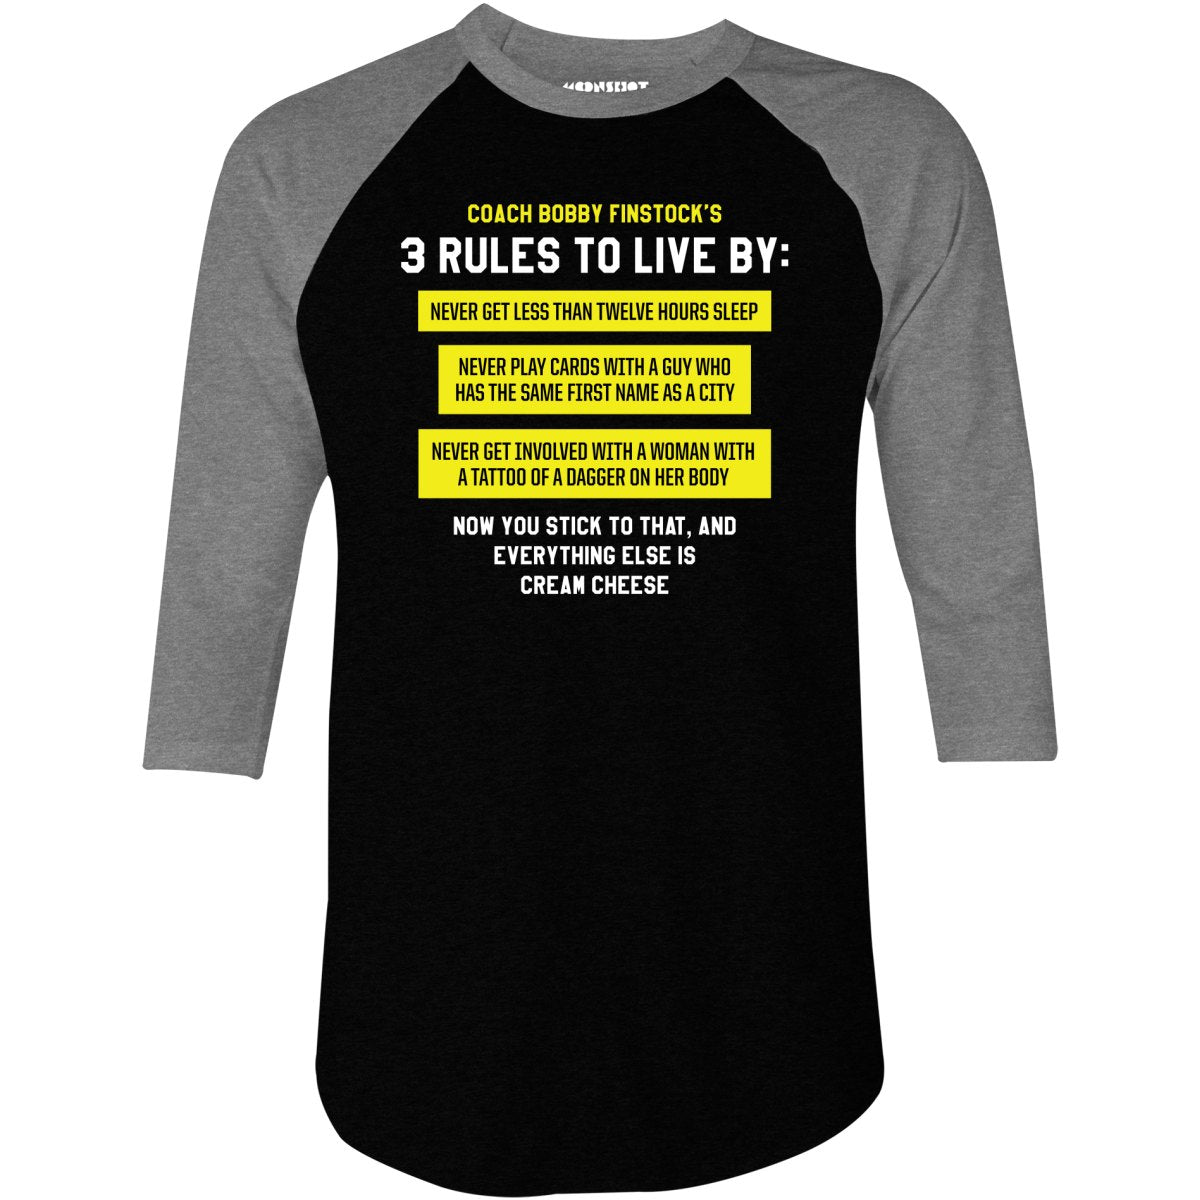 Coach Bobby Finstock's 3 Rules to Live By - 3/4 Sleeve Raglan T-Shirt